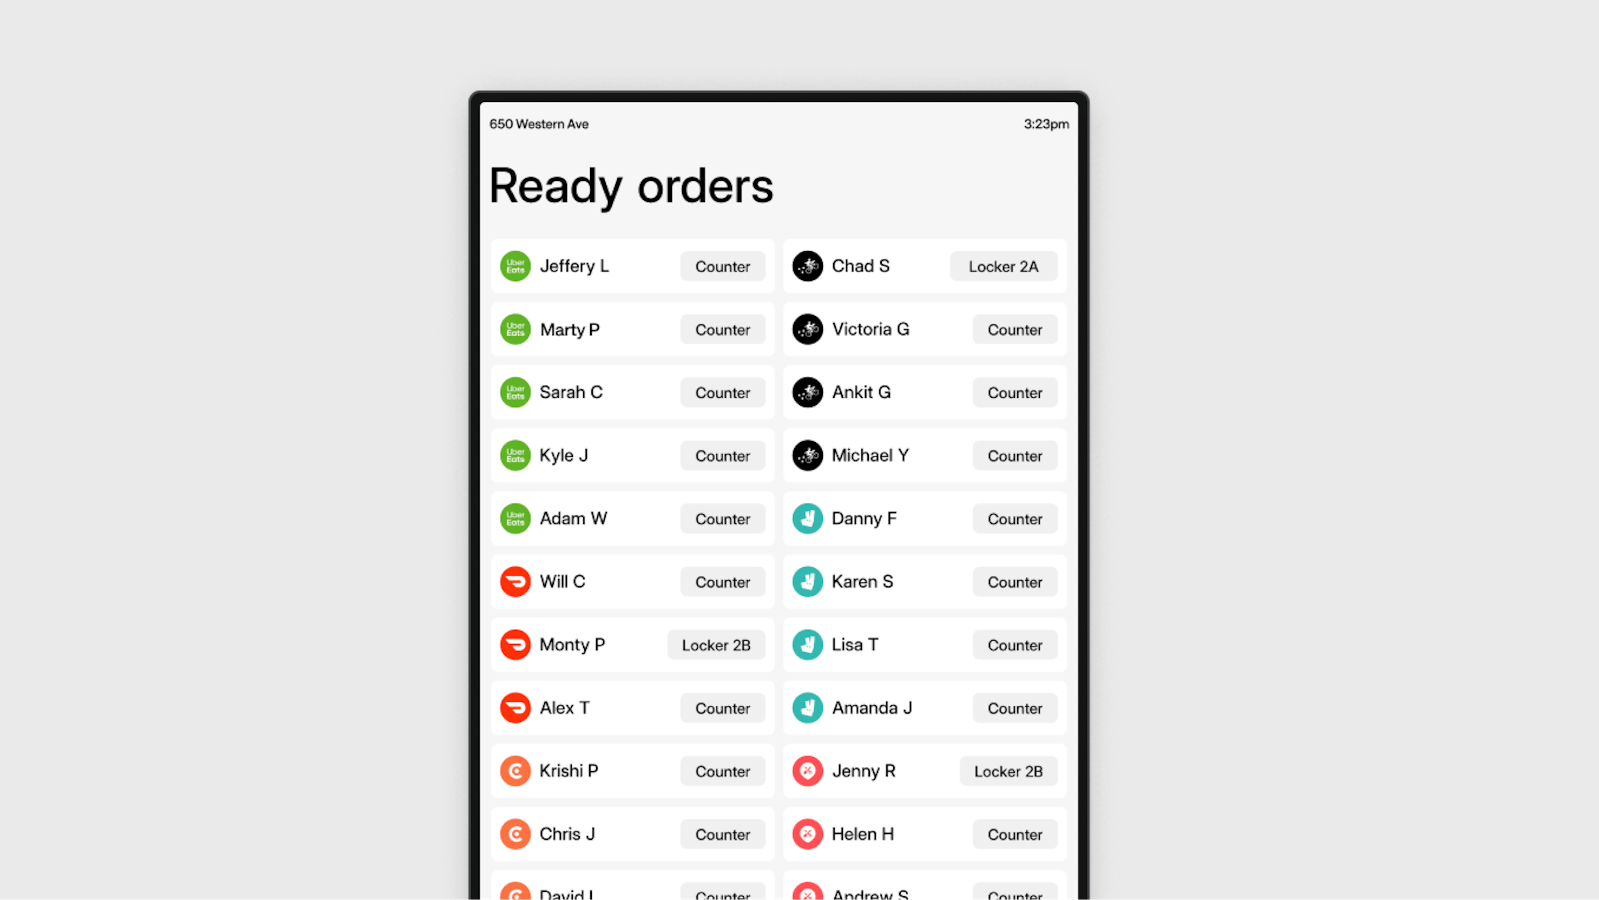 Device screen displaying ready orders by name and order location